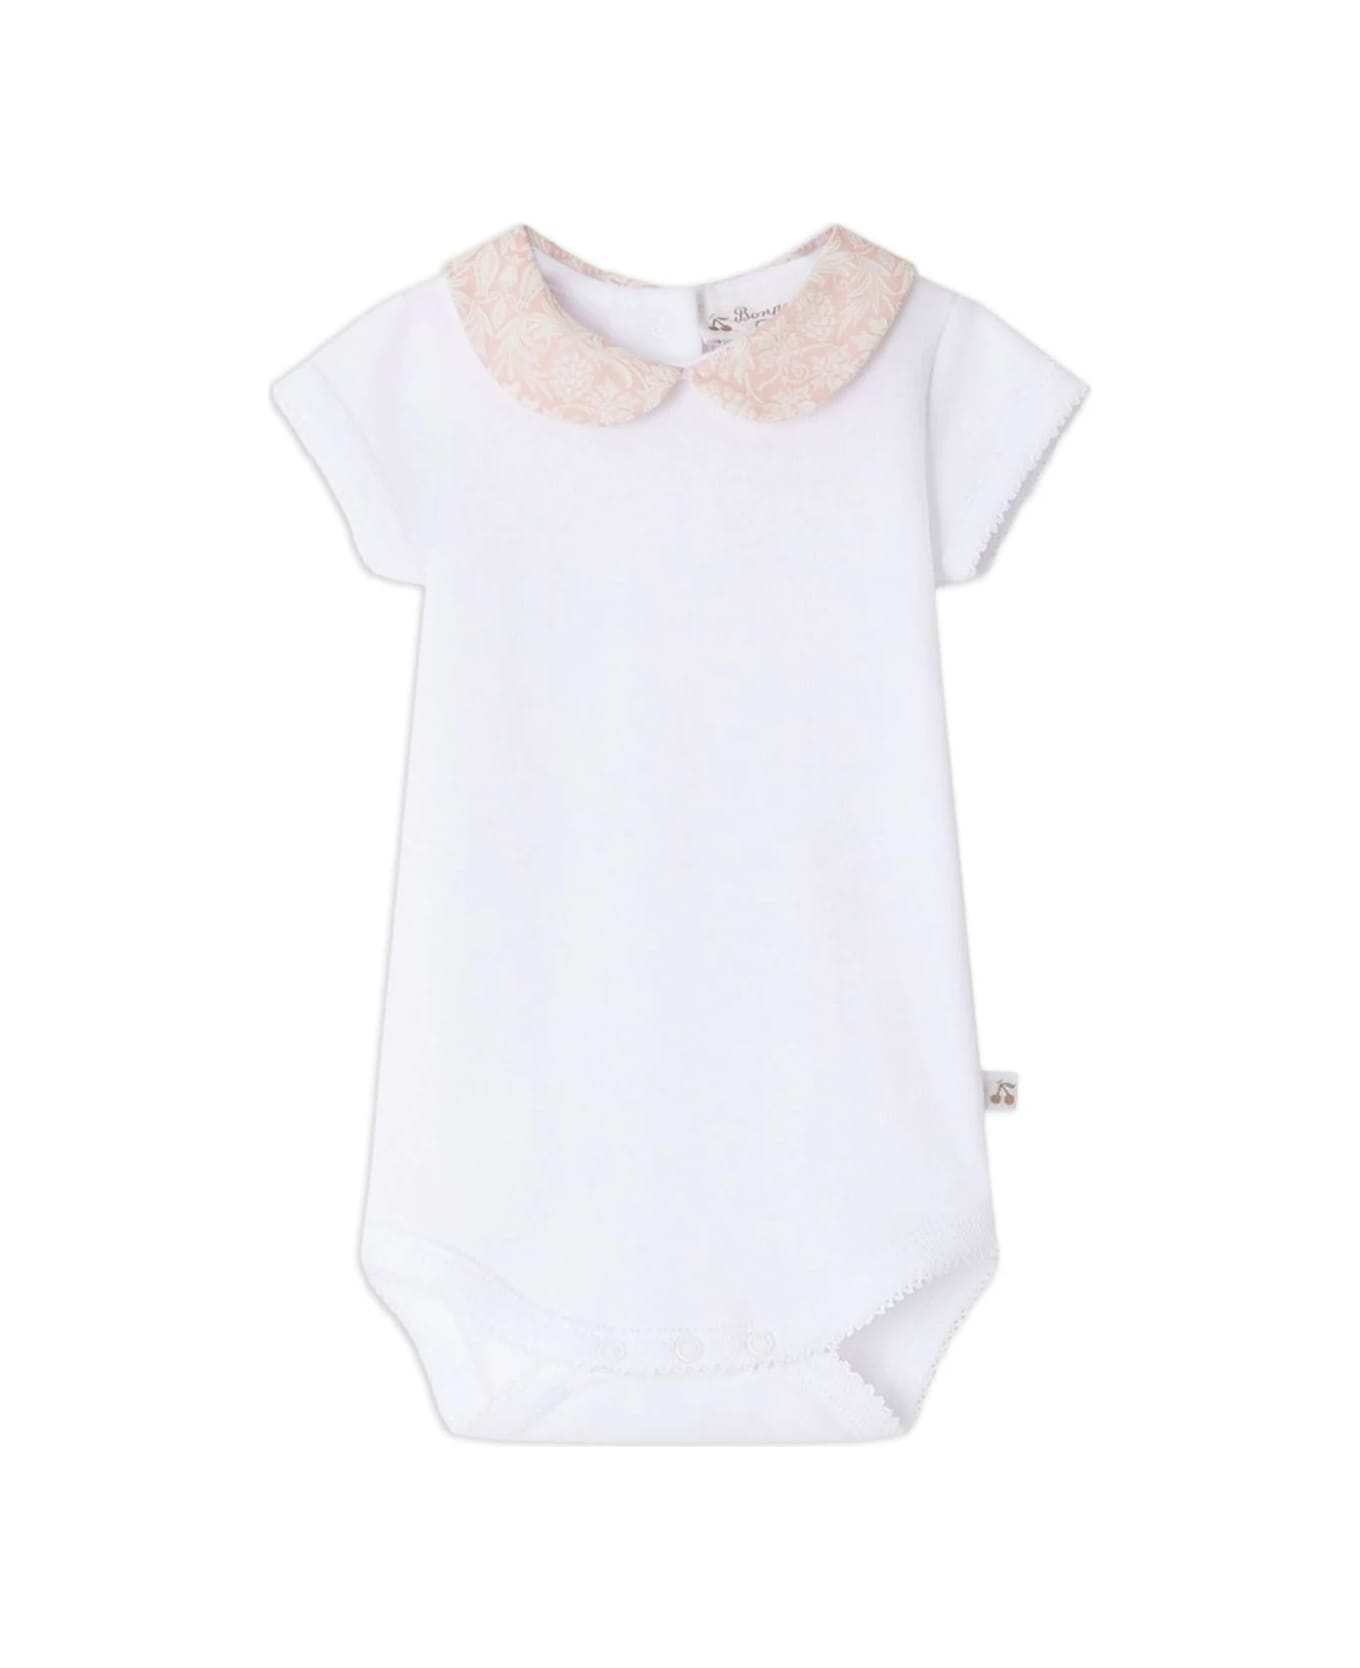 Bonpoint White And Pale Pink Calix Bodysuit - White